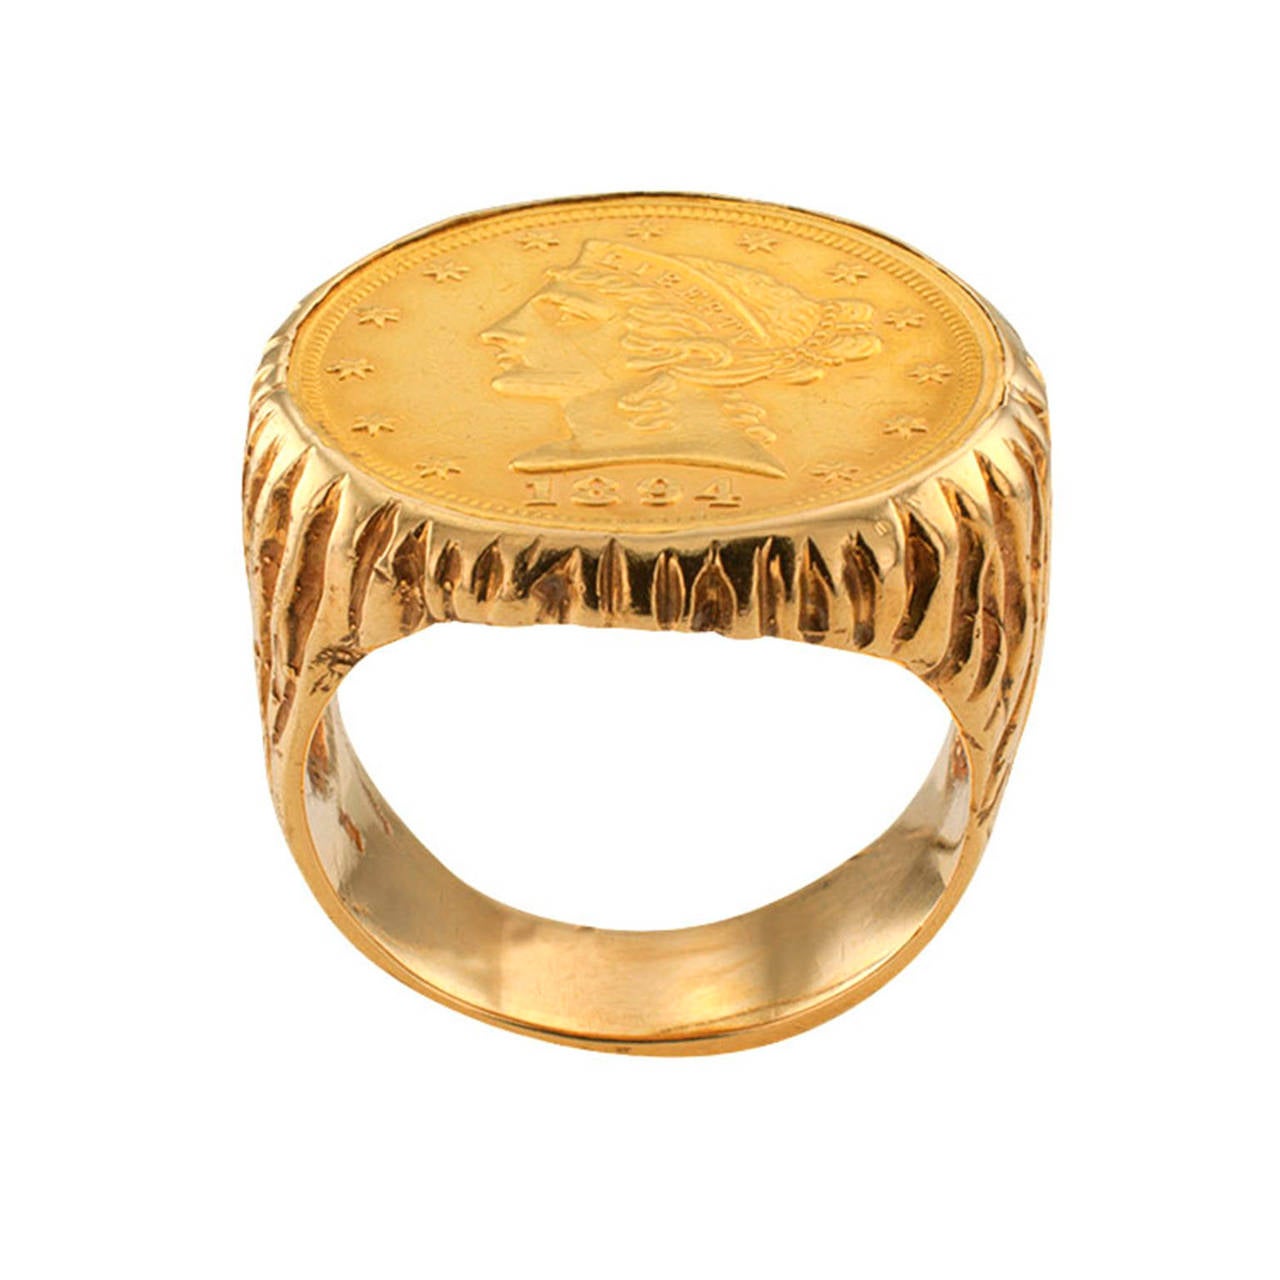 1894 US $5.00 Liberty Gold Coin Ring, Circa 1970

Featuring a US $5.00 Liberty gold coin dated 1894, bezel-set on a bold and handsome 14 karat gold mount decorated with deeply engraved organic motifs, ring size 10 plus, approximately 1